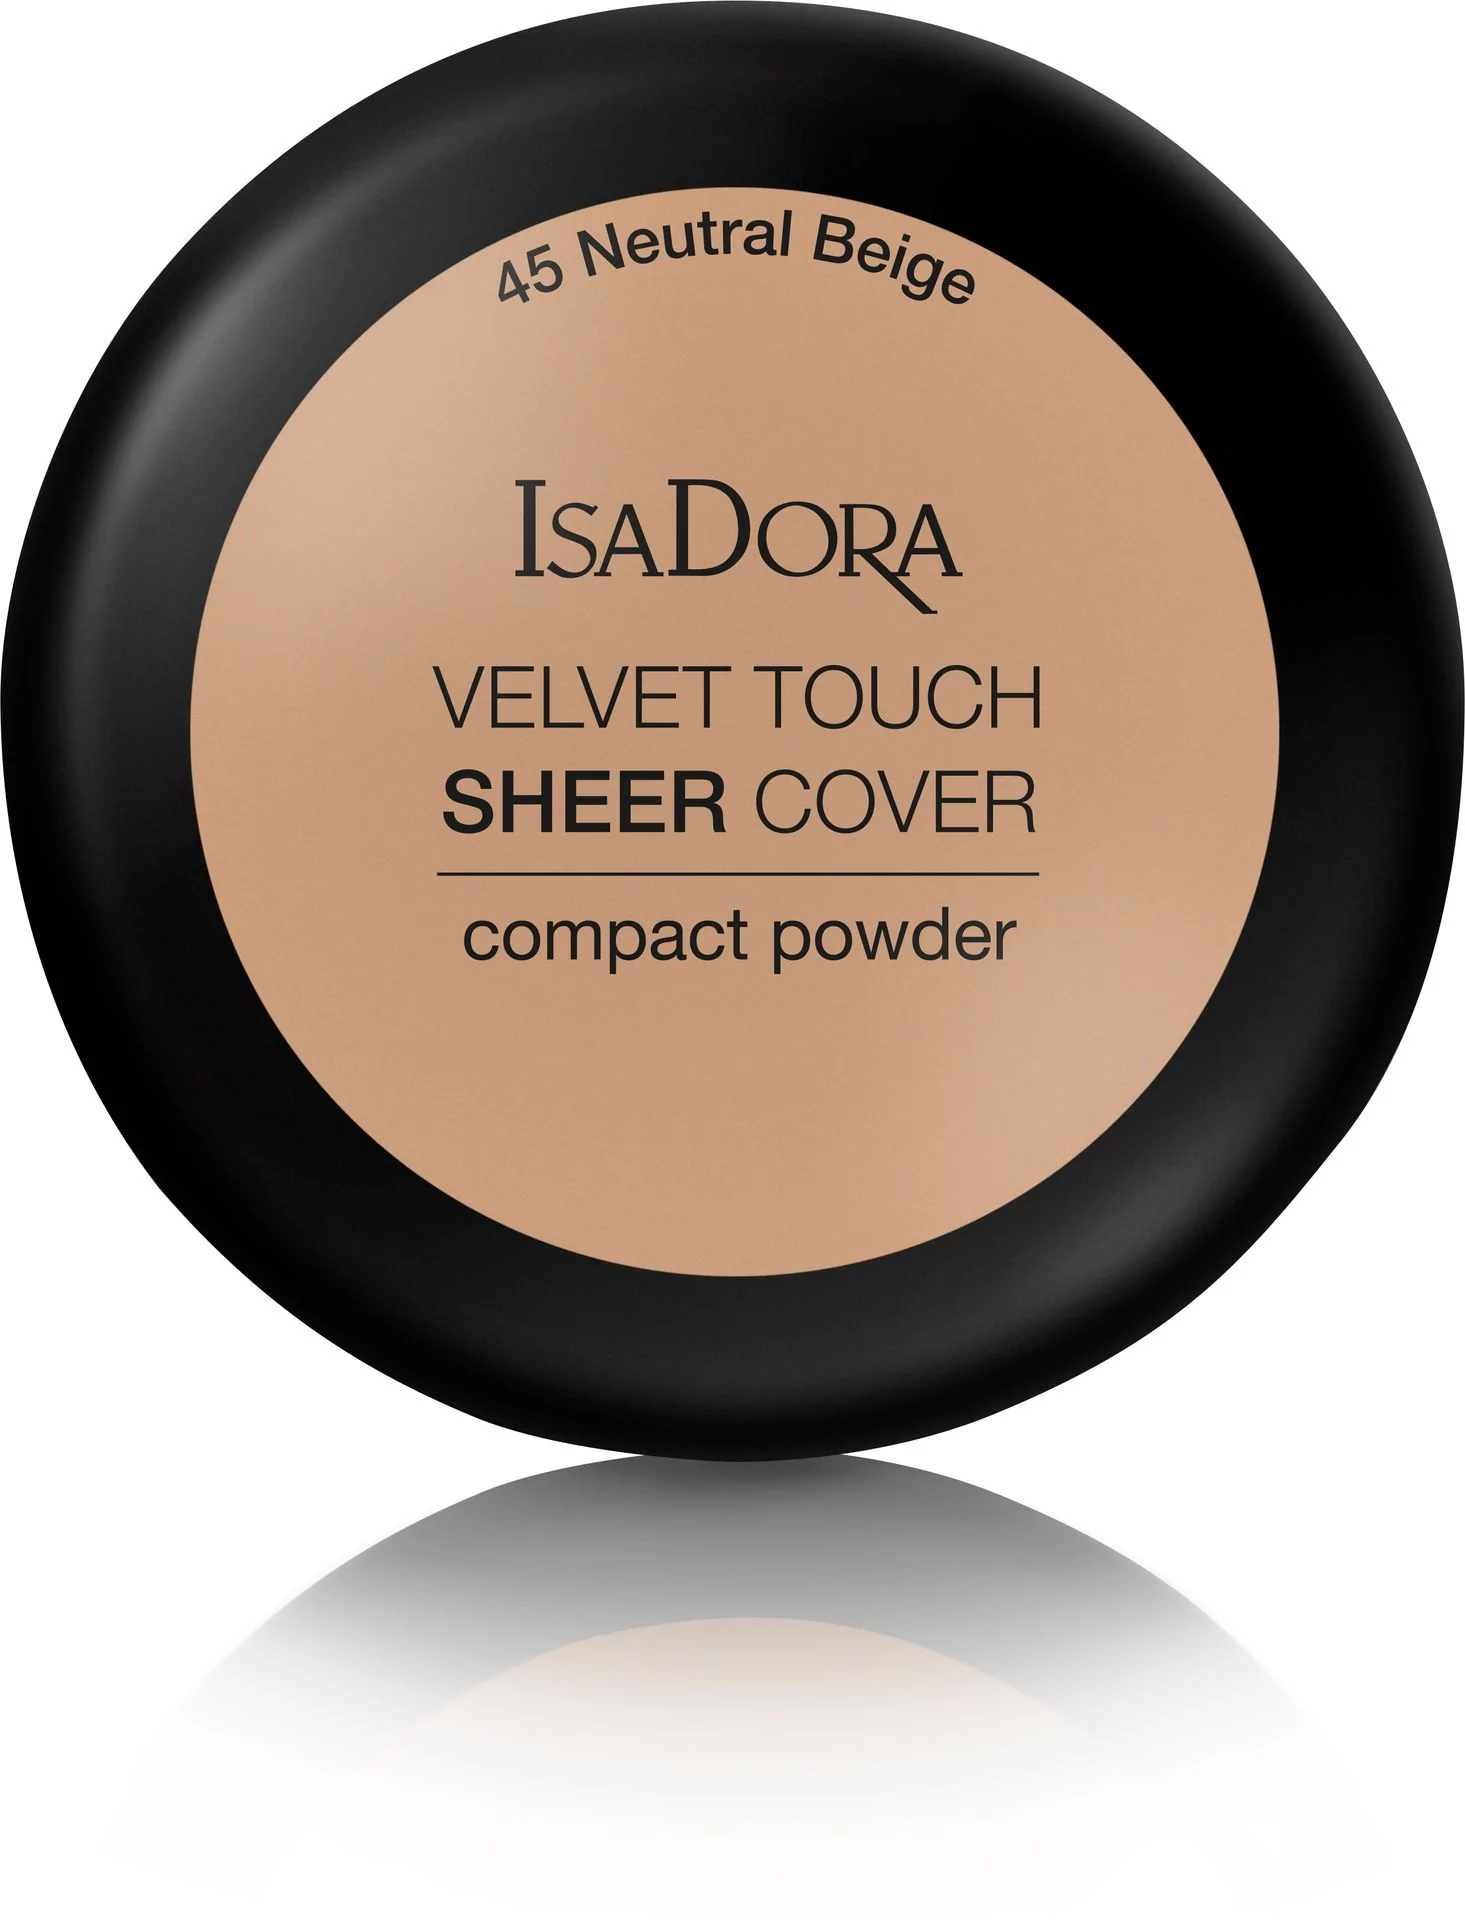 IsaDora Velvet Touch Sheer Cover Compact Powder 45 Neutral Beige - Puder w kompakcie 7,5g